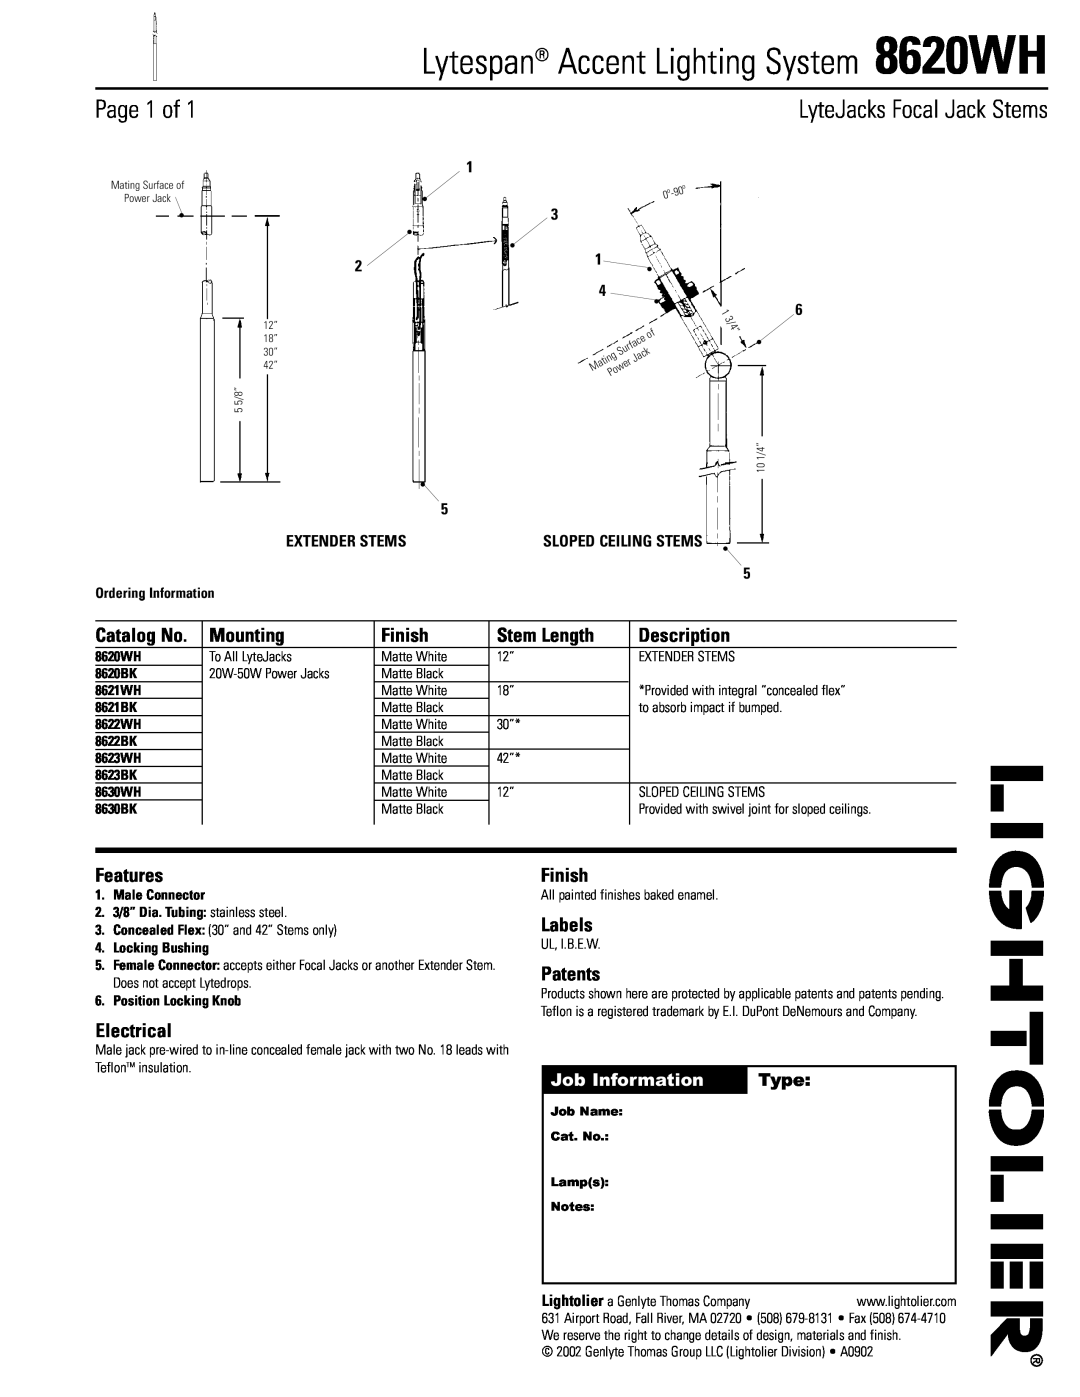 Lightolier manual Lytespan Accent Lighting System 8620WH, Page 1 of, LyteJacks Focal Jack Stems, Mounting, Finish, Type 